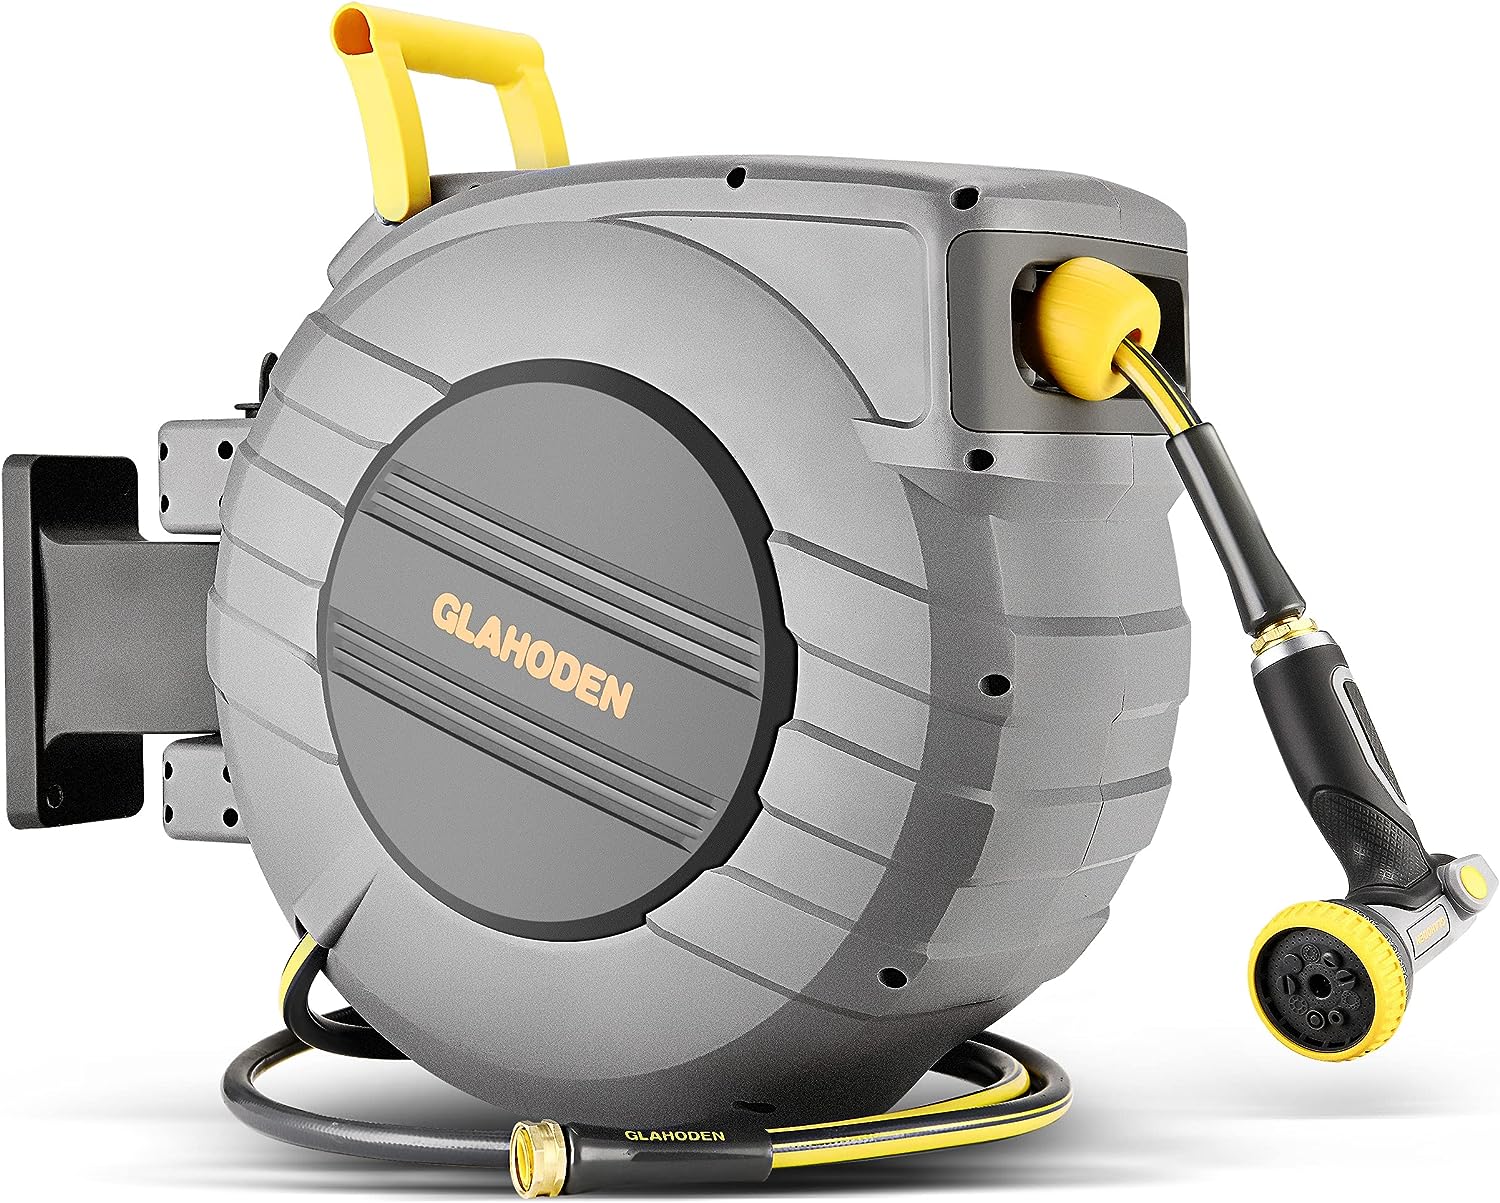 GLAHODEN Retractable Garden Hose Reel, 1/2in x 140ft+6ft Increase Flow Rate  By 20% Water Hose Reel, Patented Design for Any Length Lock Slow Return